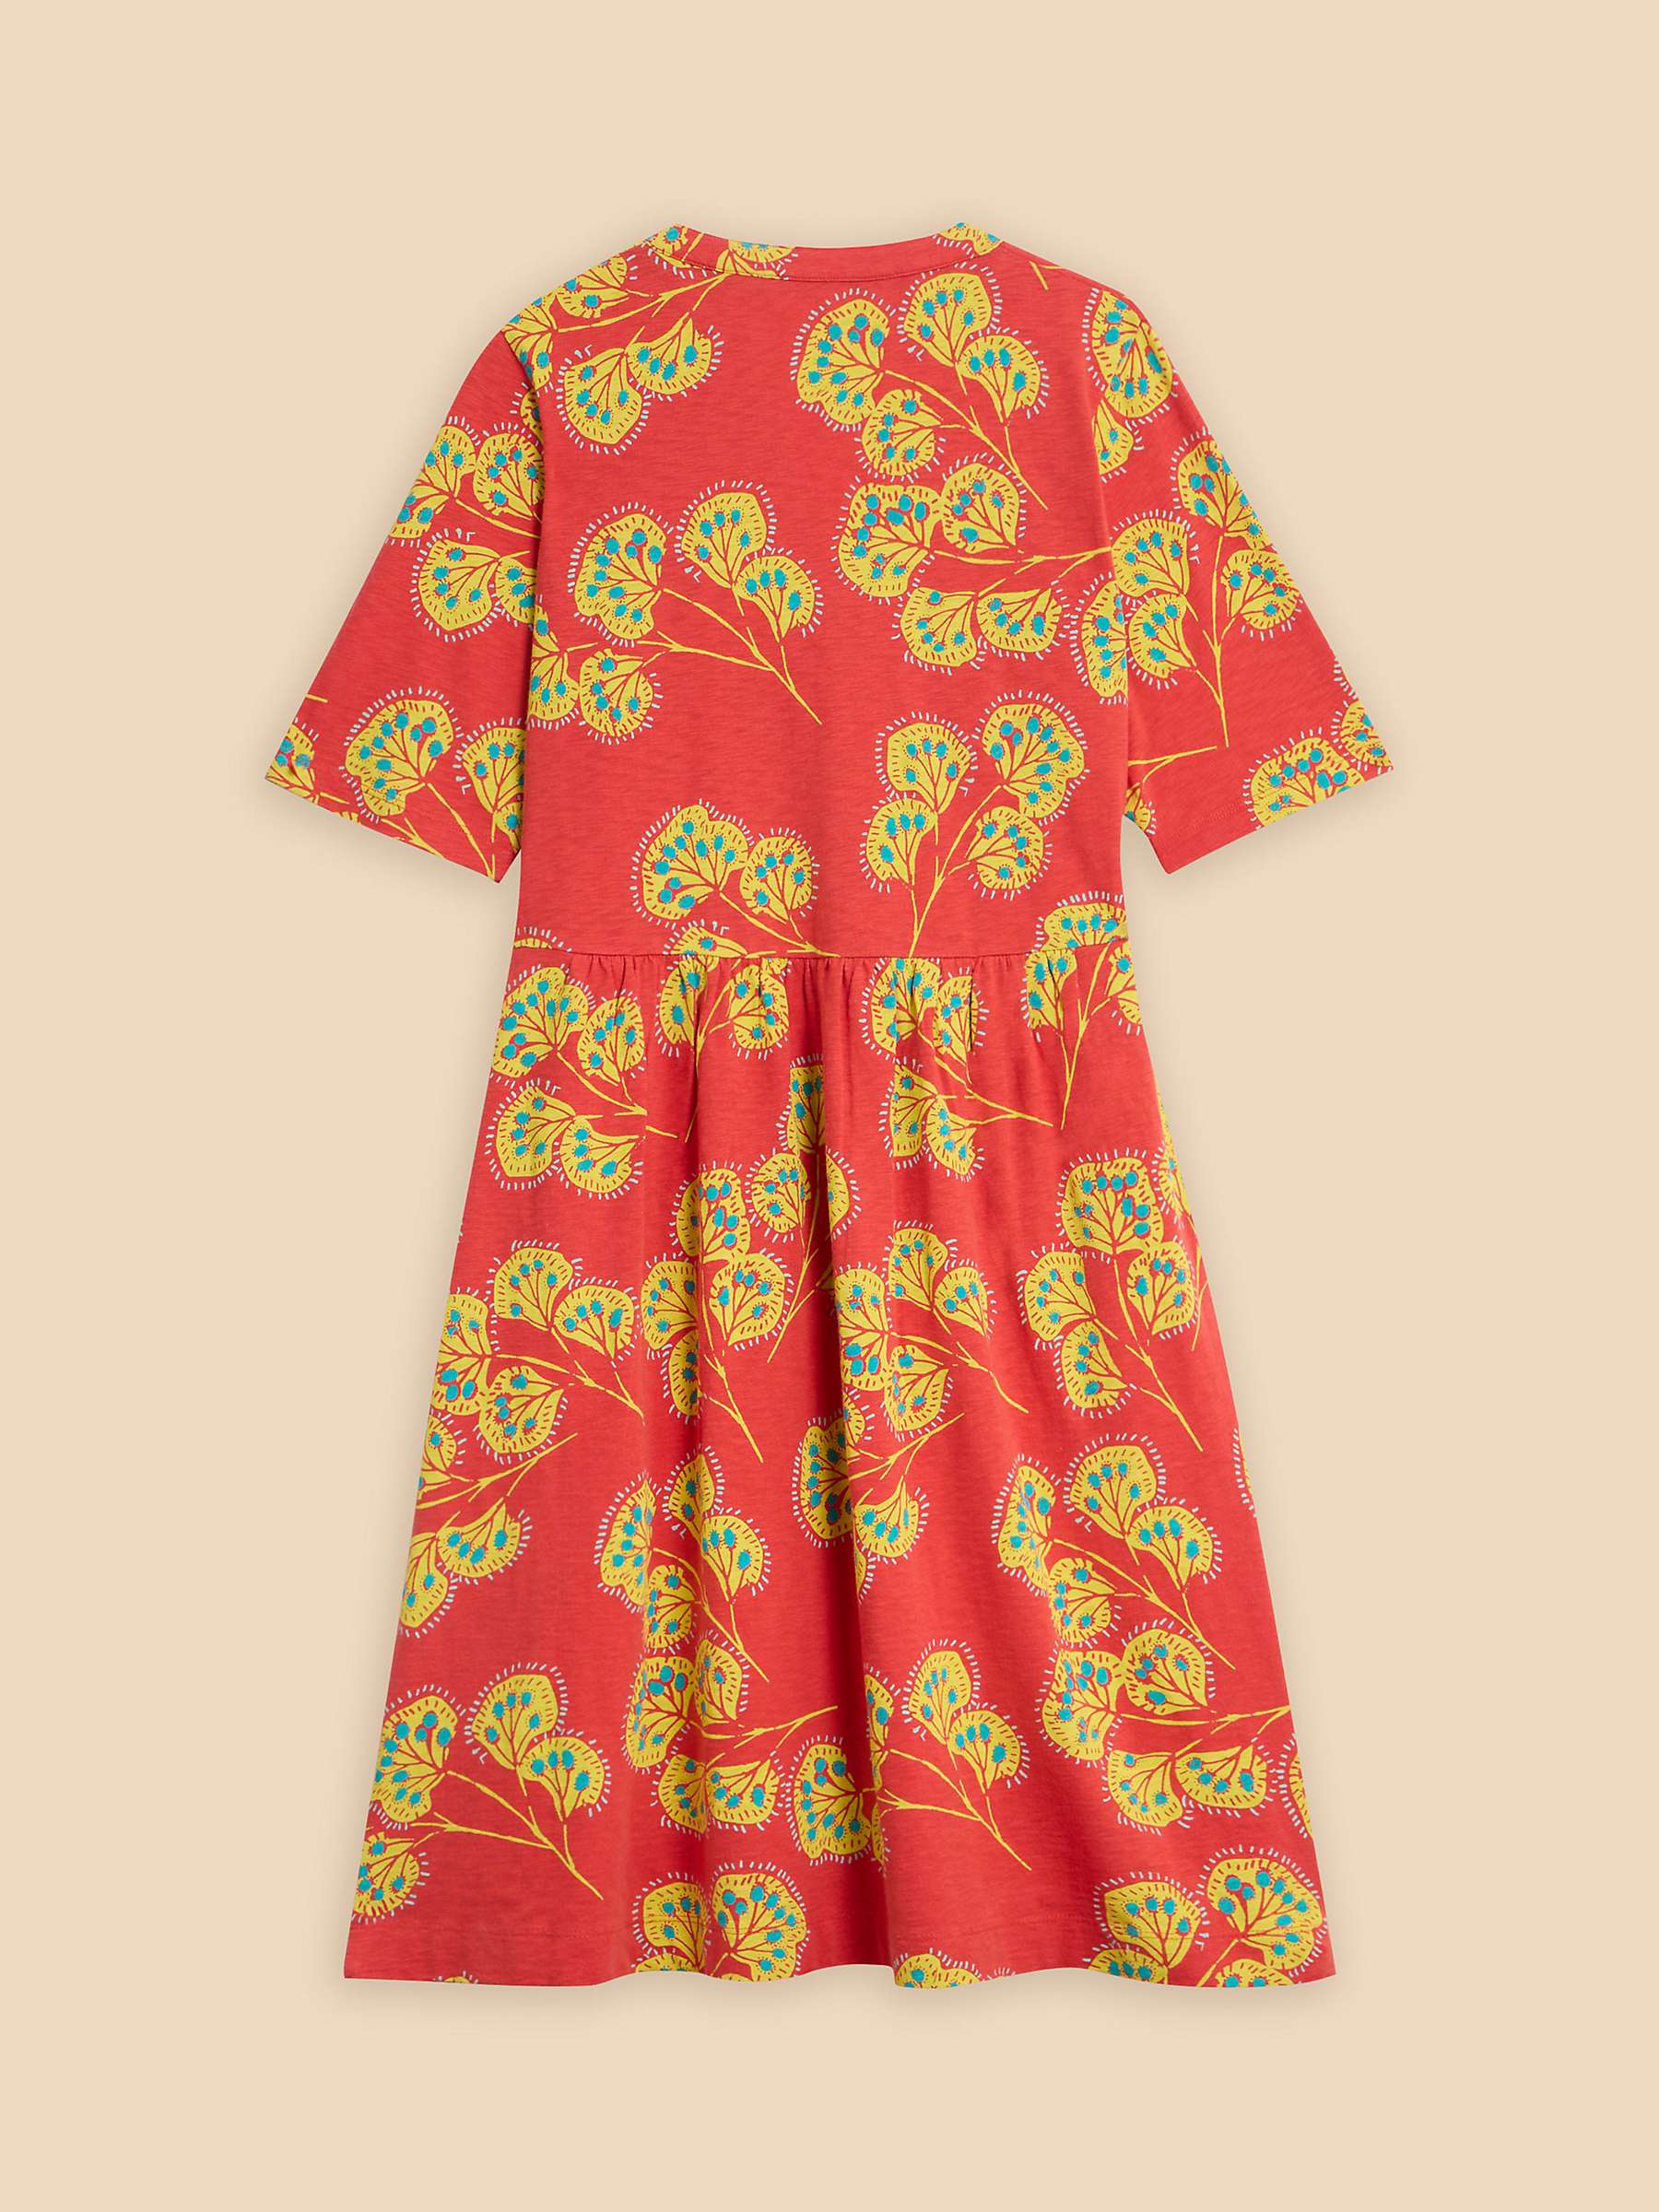 Buy White Stuff Thea Notch Neck Cotton Dress, Red/Multi Online at johnlewis.com